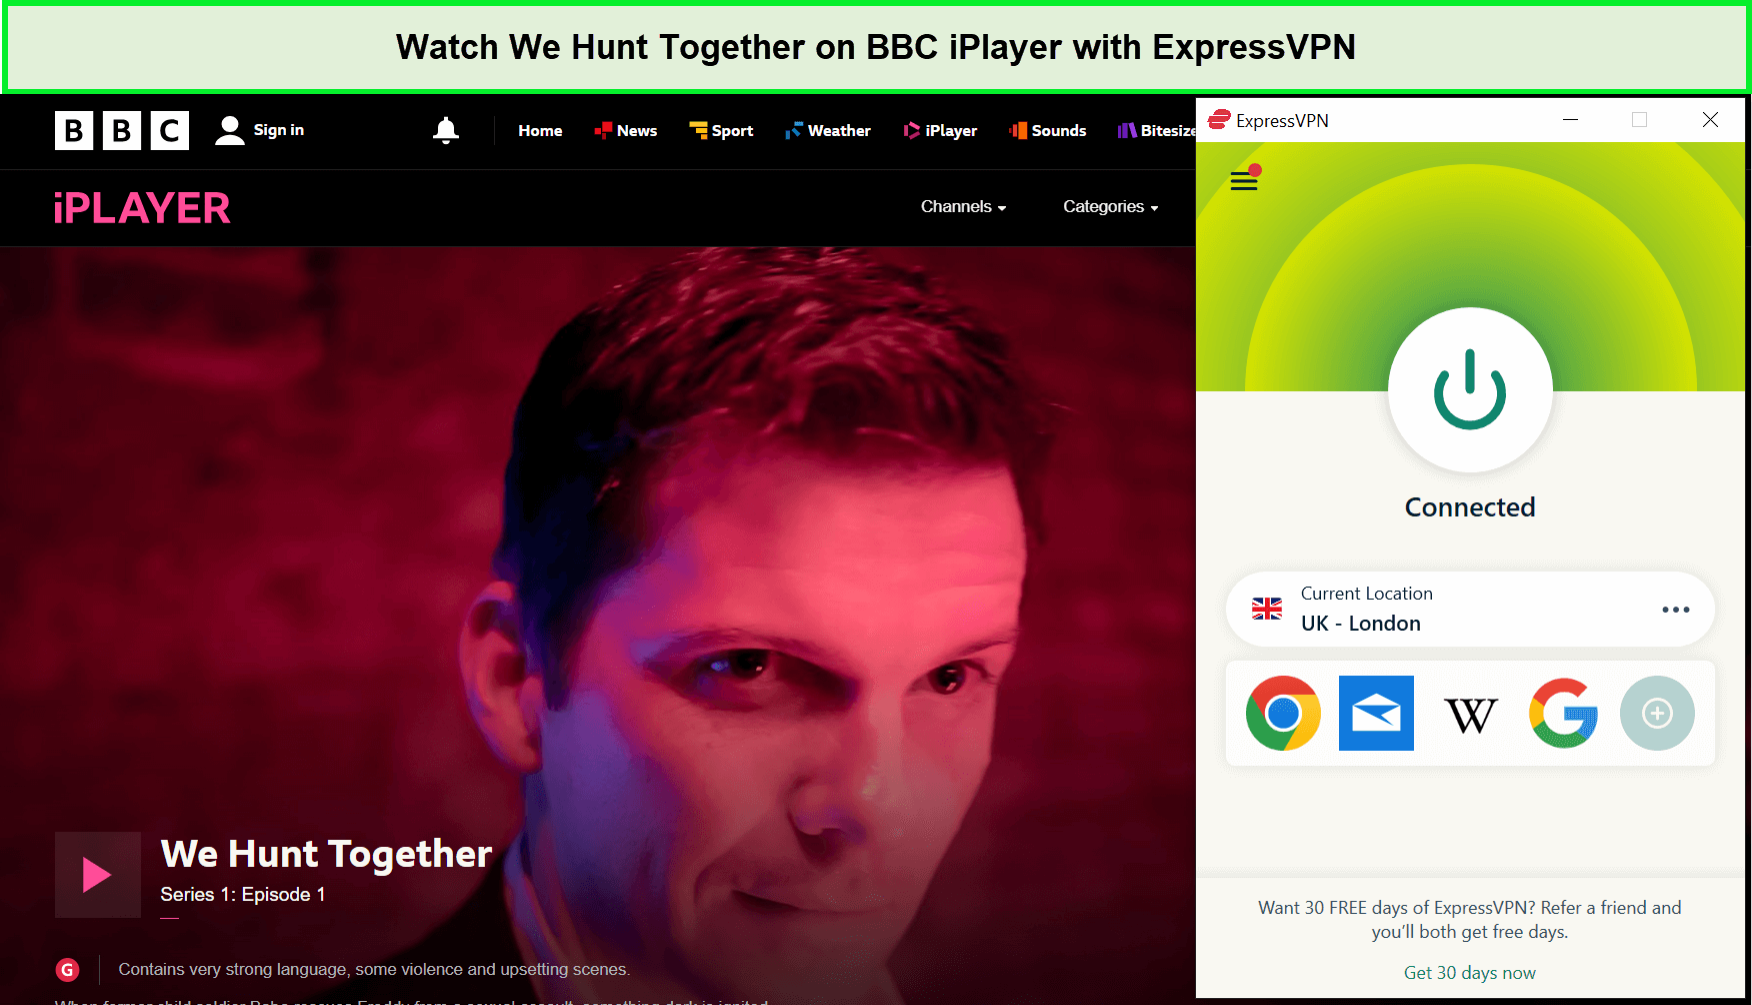 Watch-We-Hunt-Together-in-Hong Kongon-BBC-iPlayer-with-ExpressVPN